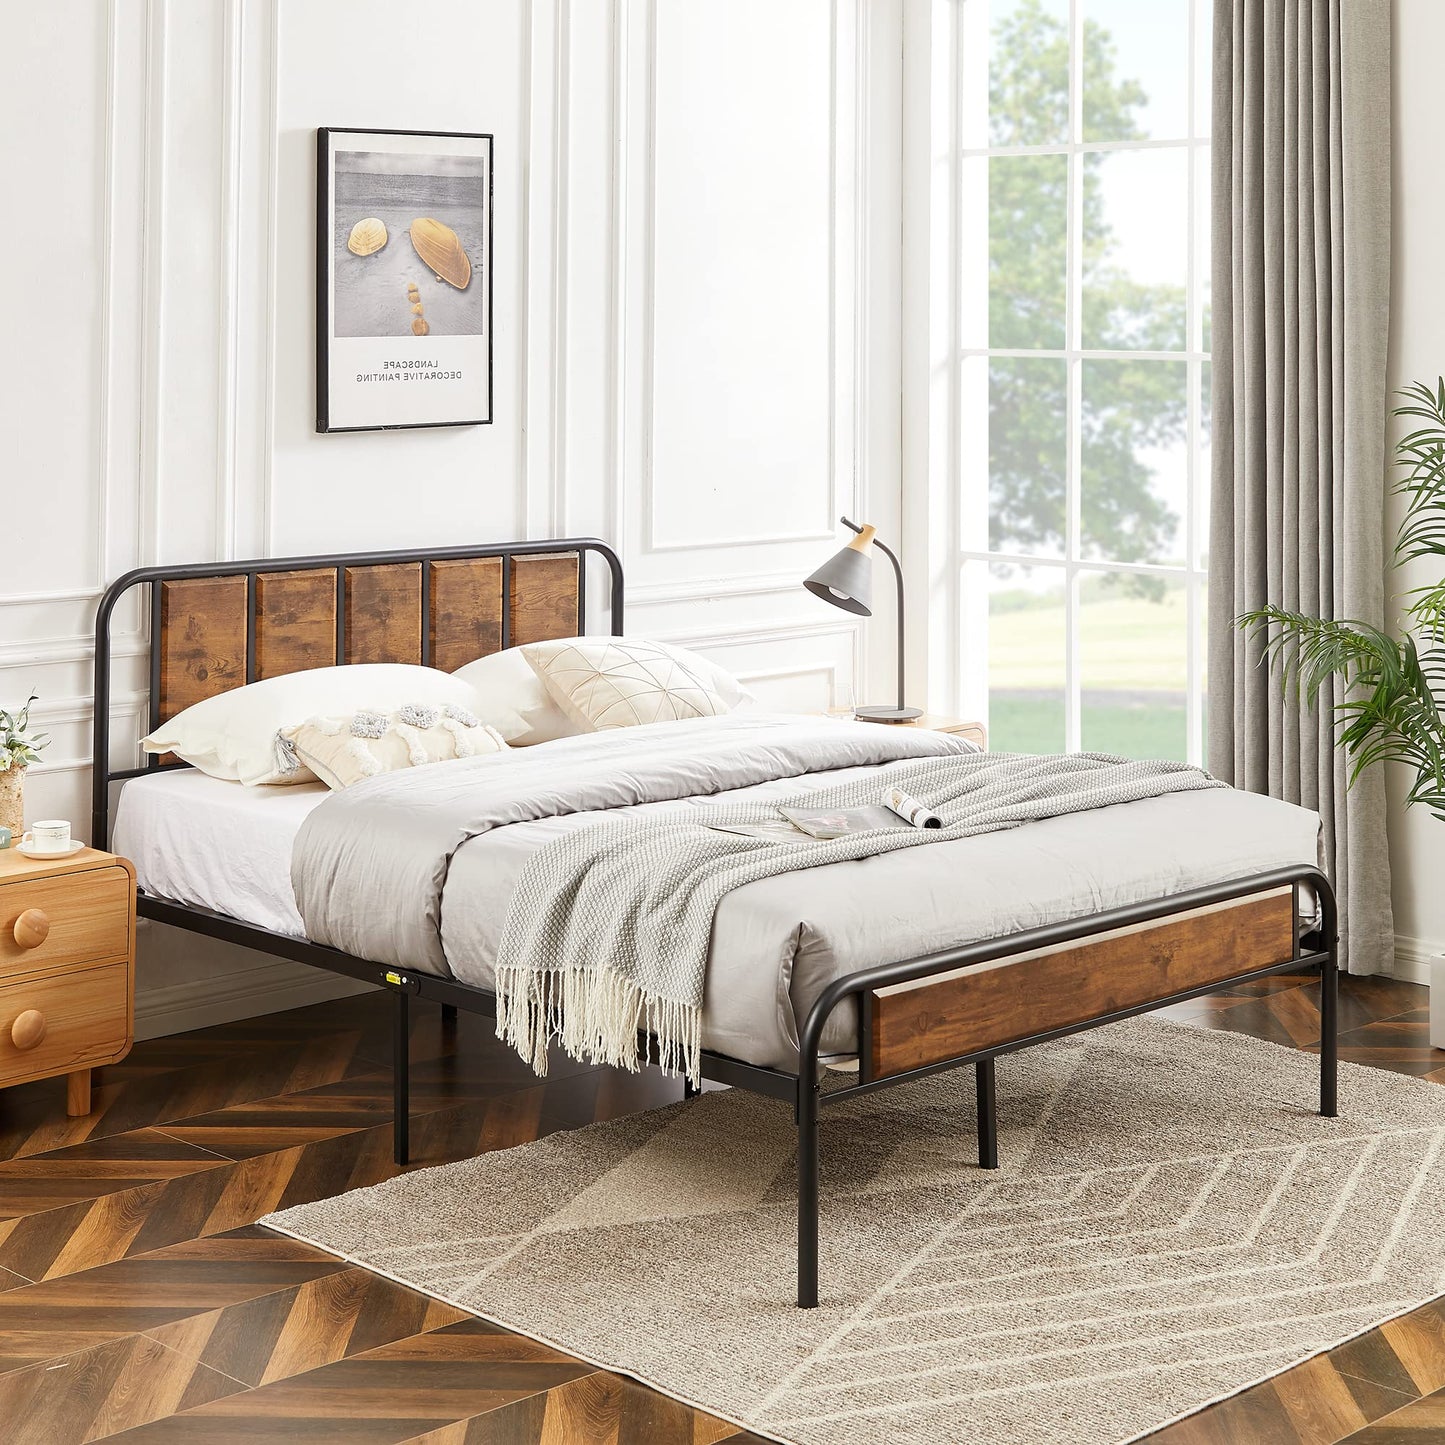 VECELO Queen Size Platform Bed Frame with Wooden Headboard,Sturdy Steel Slats Support/Matress Foudation/No Box Spring Needed(Brown)